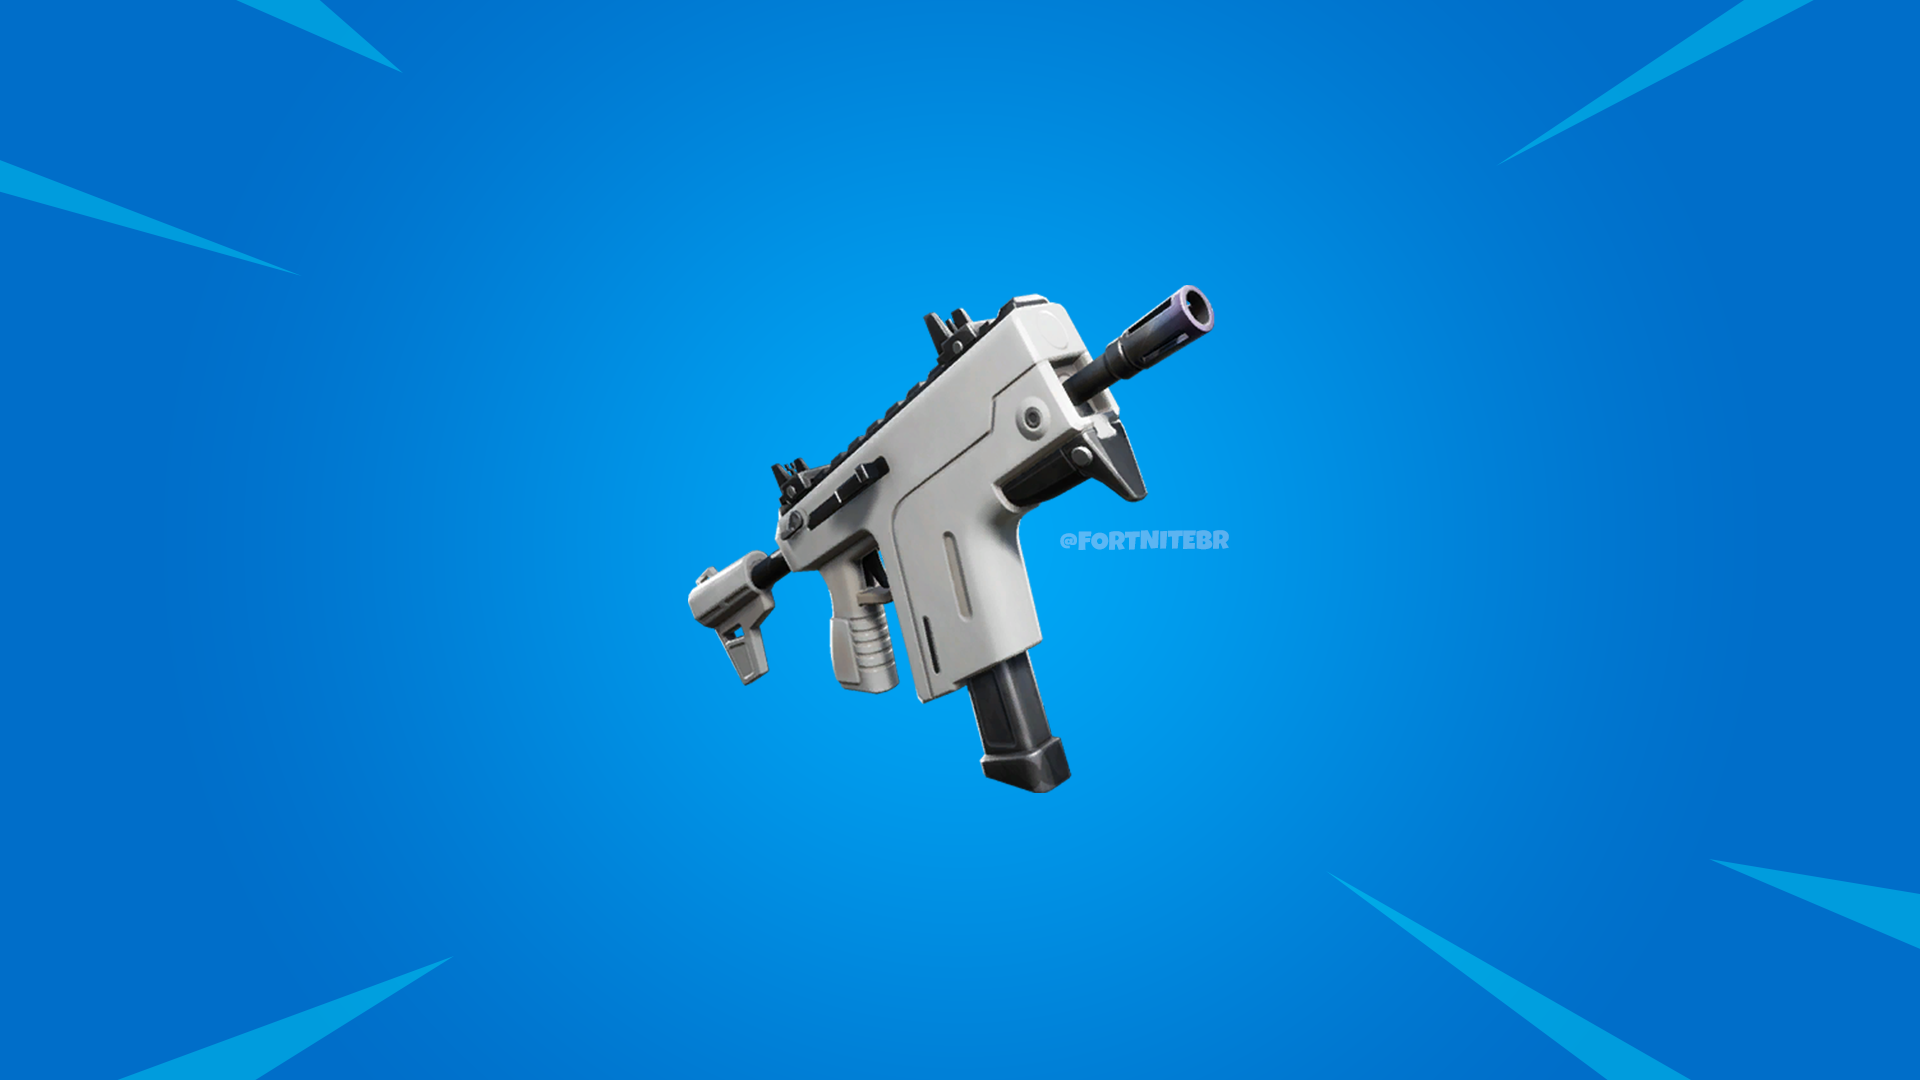 Official: Burst SMG Coming to Fortnite Tomorrow